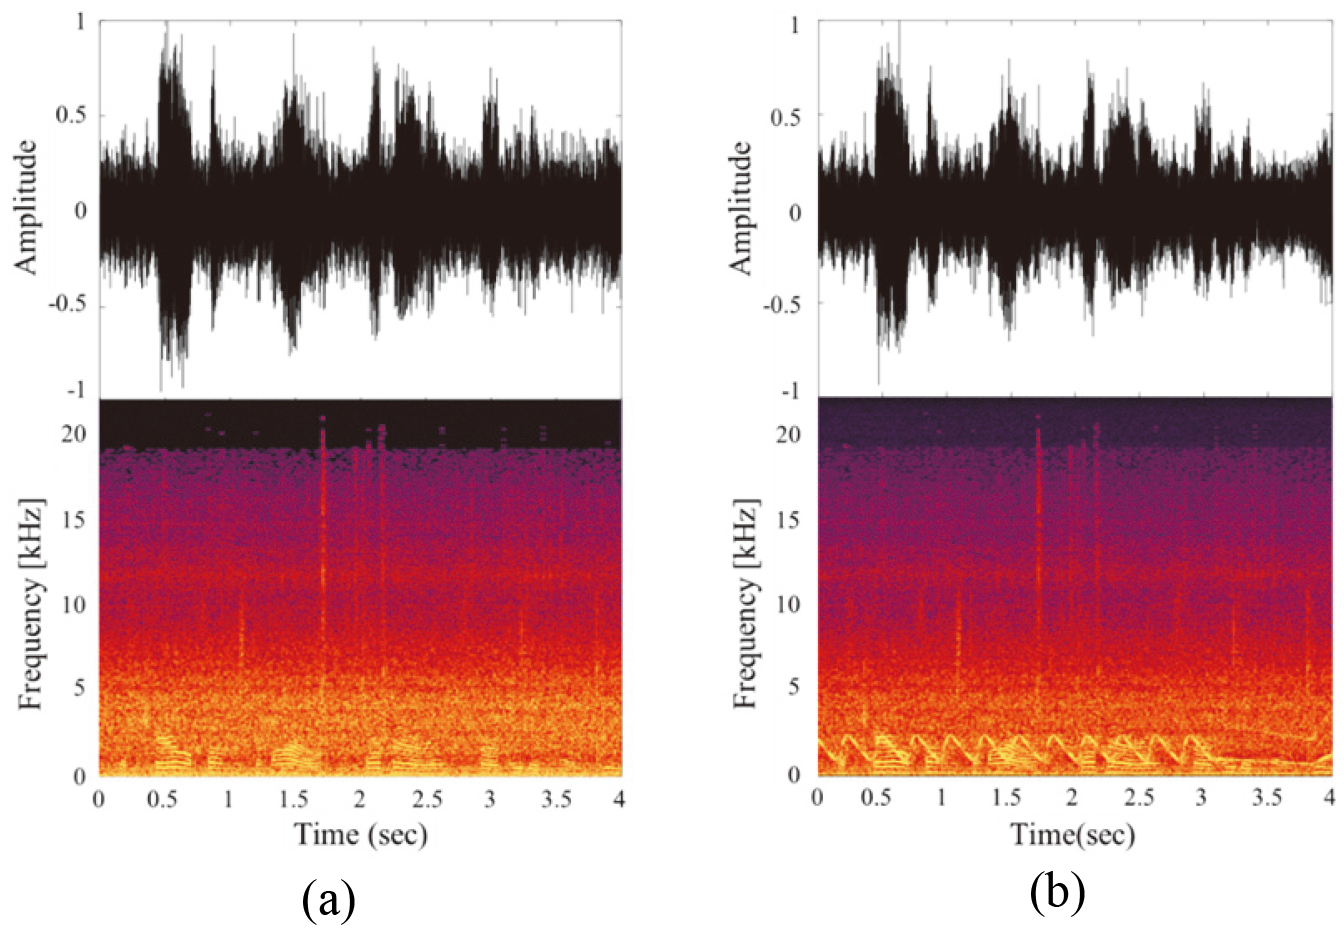 The input dataset applied to each model. (a) A sound signal with mixed speech and noise and (b) A sound signal with mixed speech, warning sound, and noise.